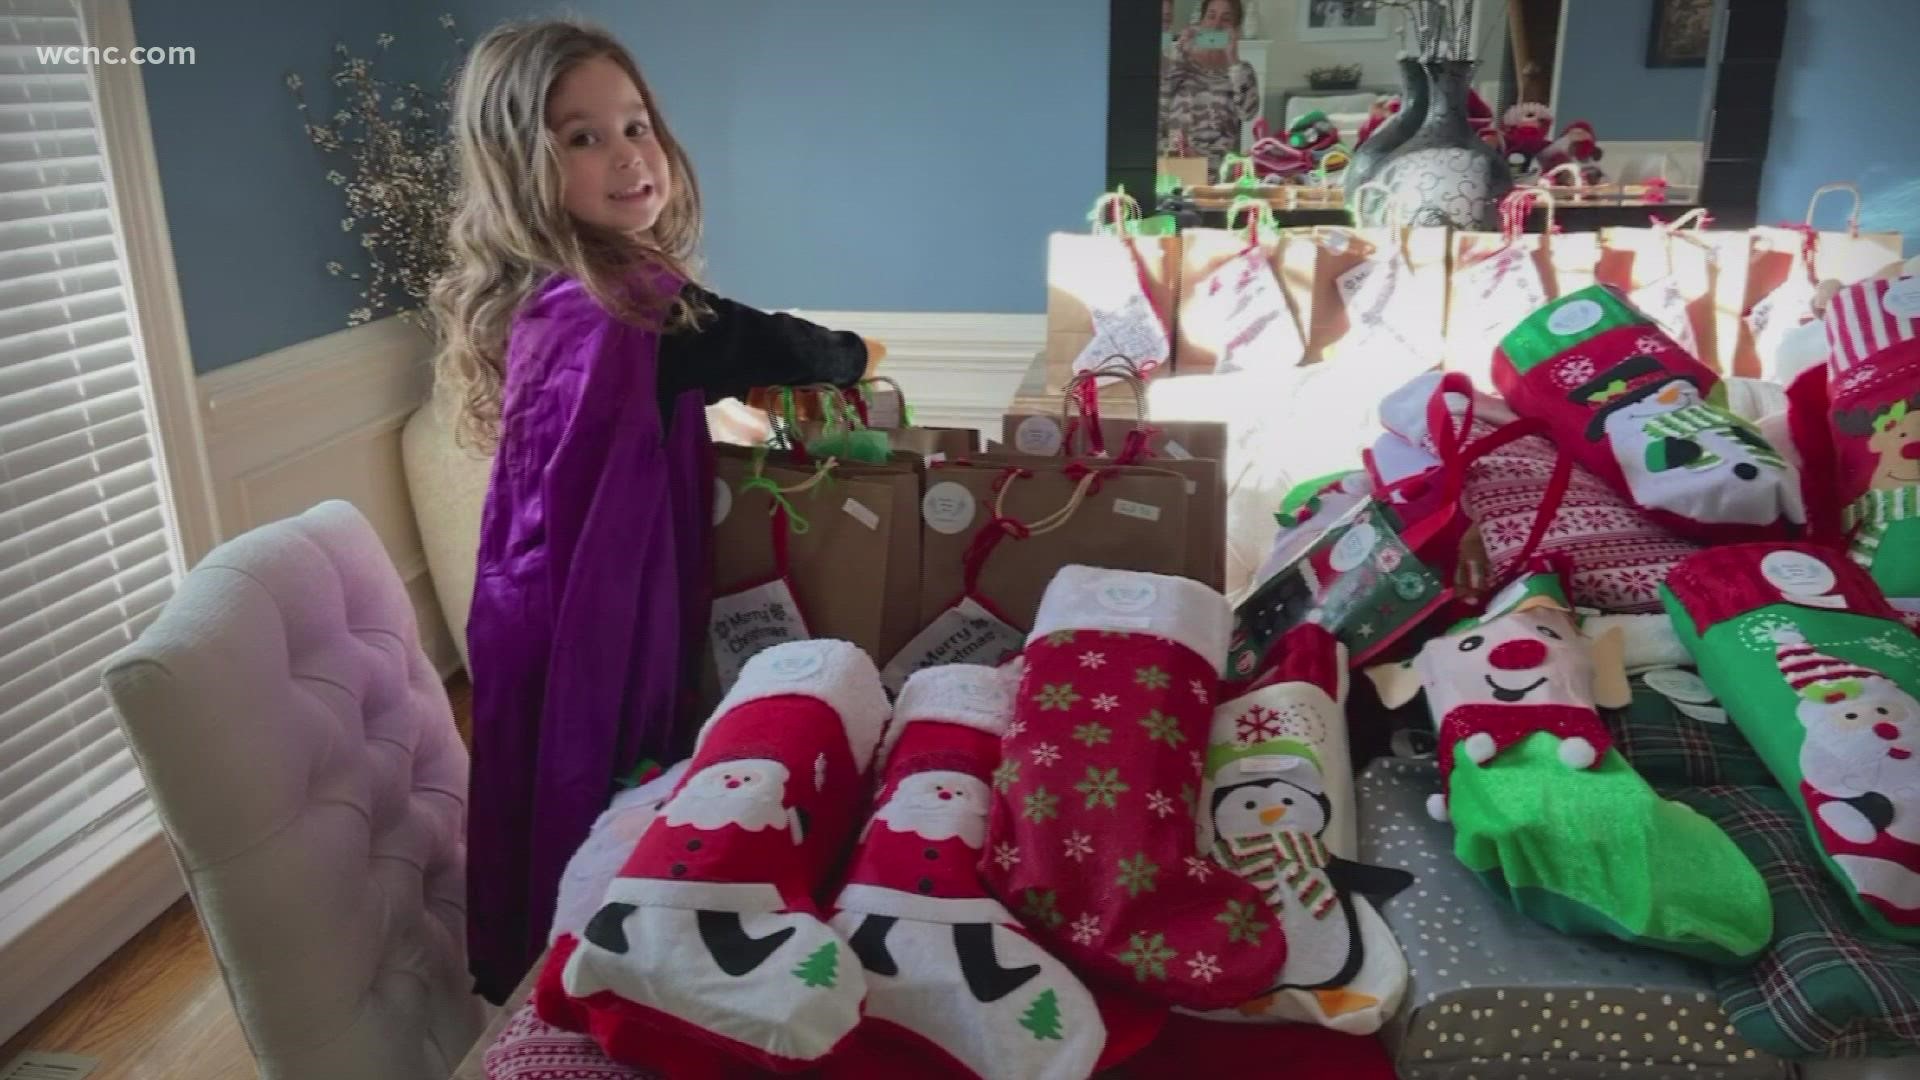 Evangeline needs less than $5,000 to make her stocking drive goal for 2021. The fundraiser was born after Eva spent time at Levine Children's hospital herself.